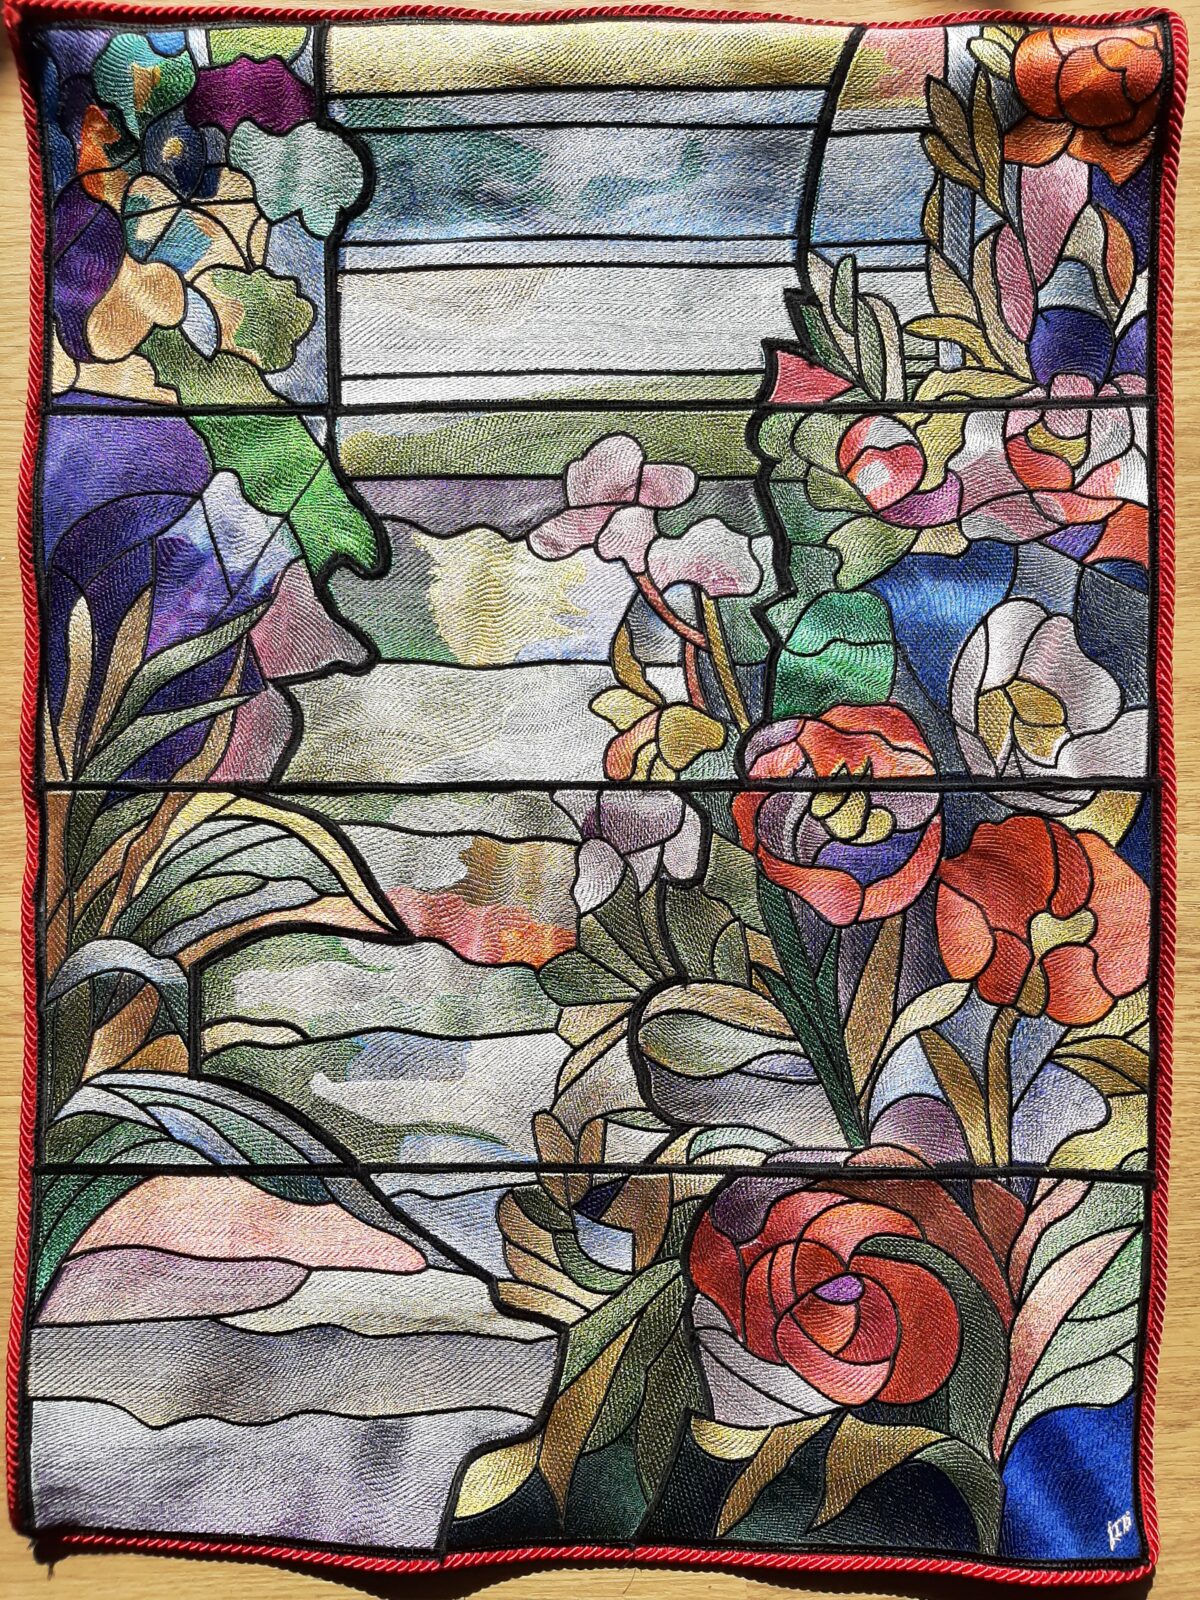 Jannie’s Beautiful Stained Glass